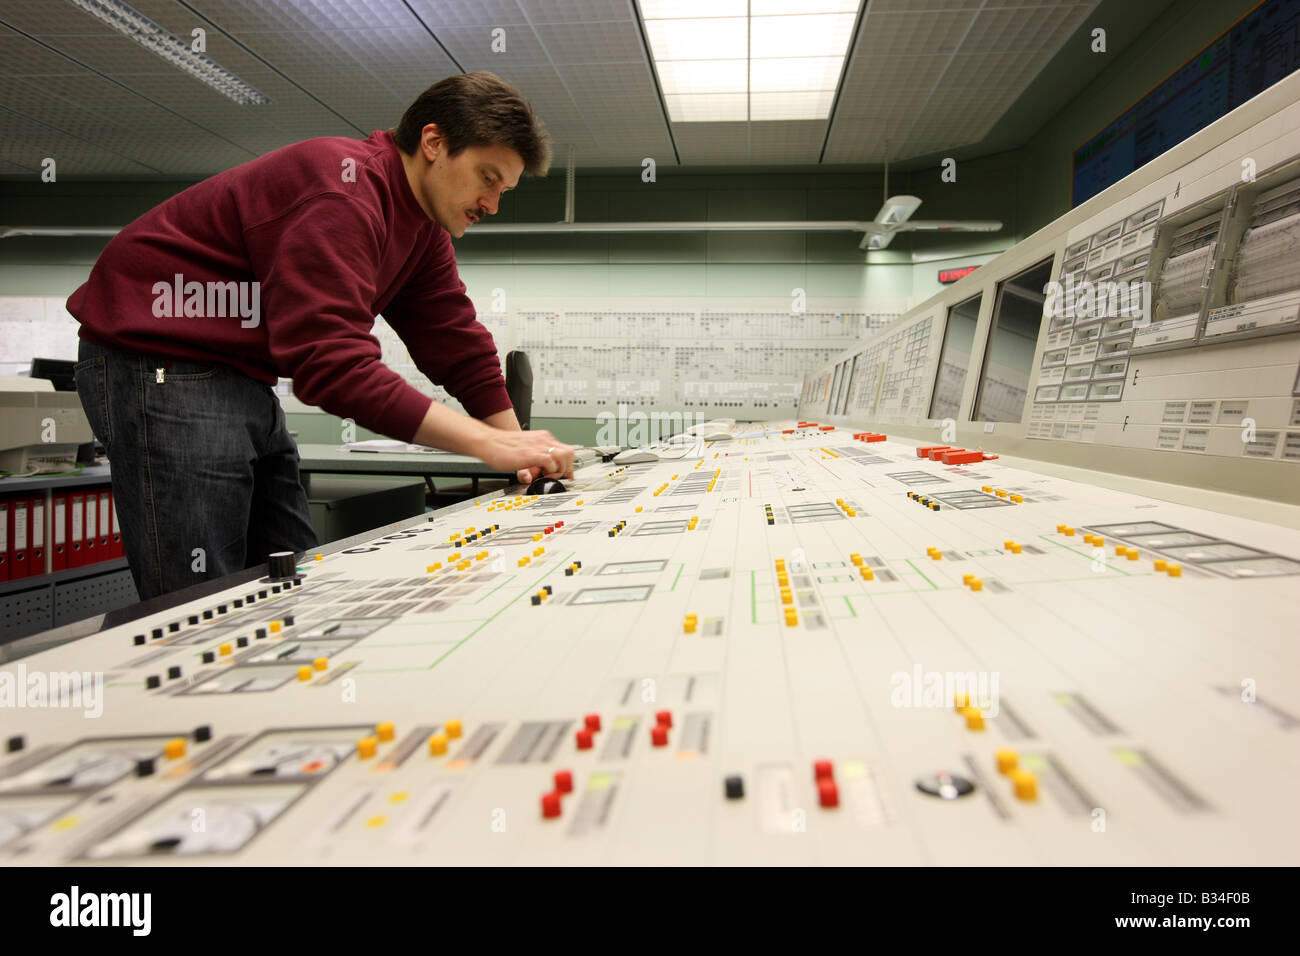 Simulator center for nuclear power stations, training facility for power station staff. Essen, Germany Stock Photo